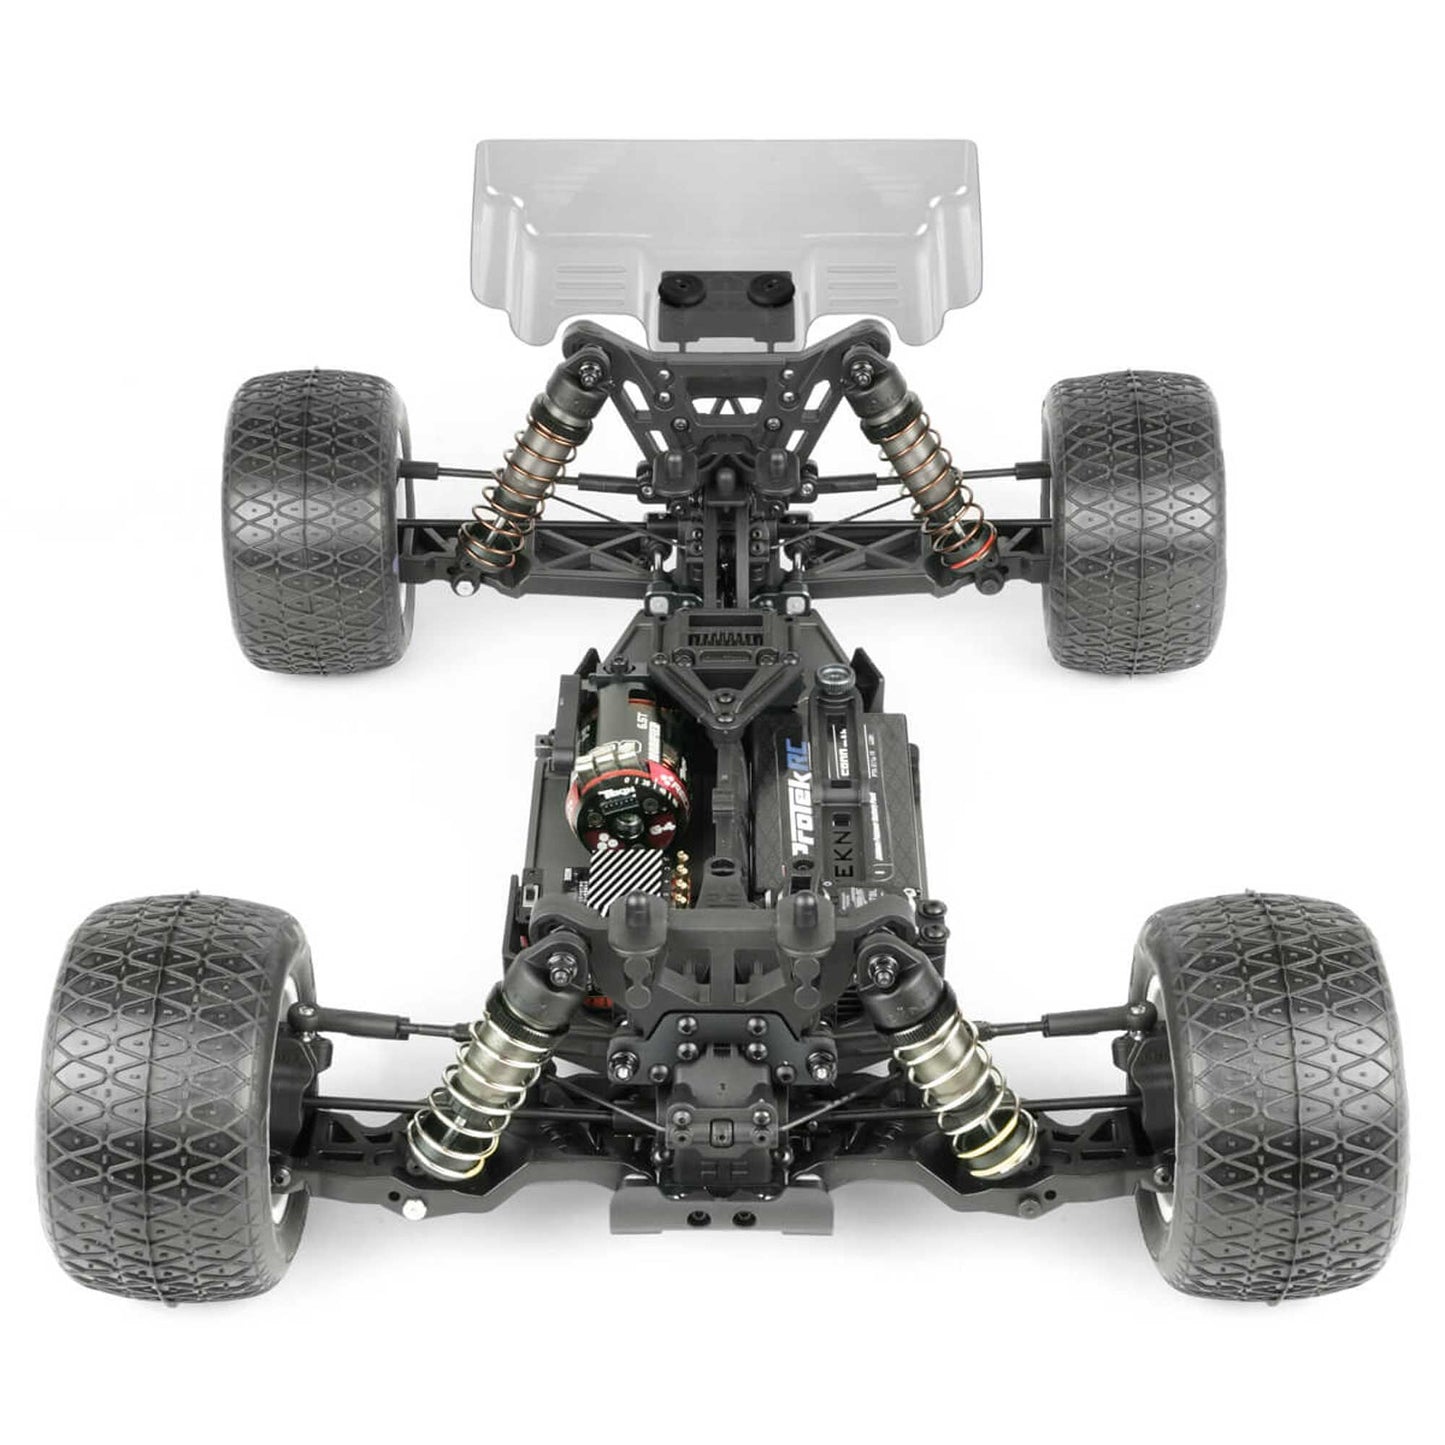 1/10 ET410.2 4WD Competition Electric Truggy Kit